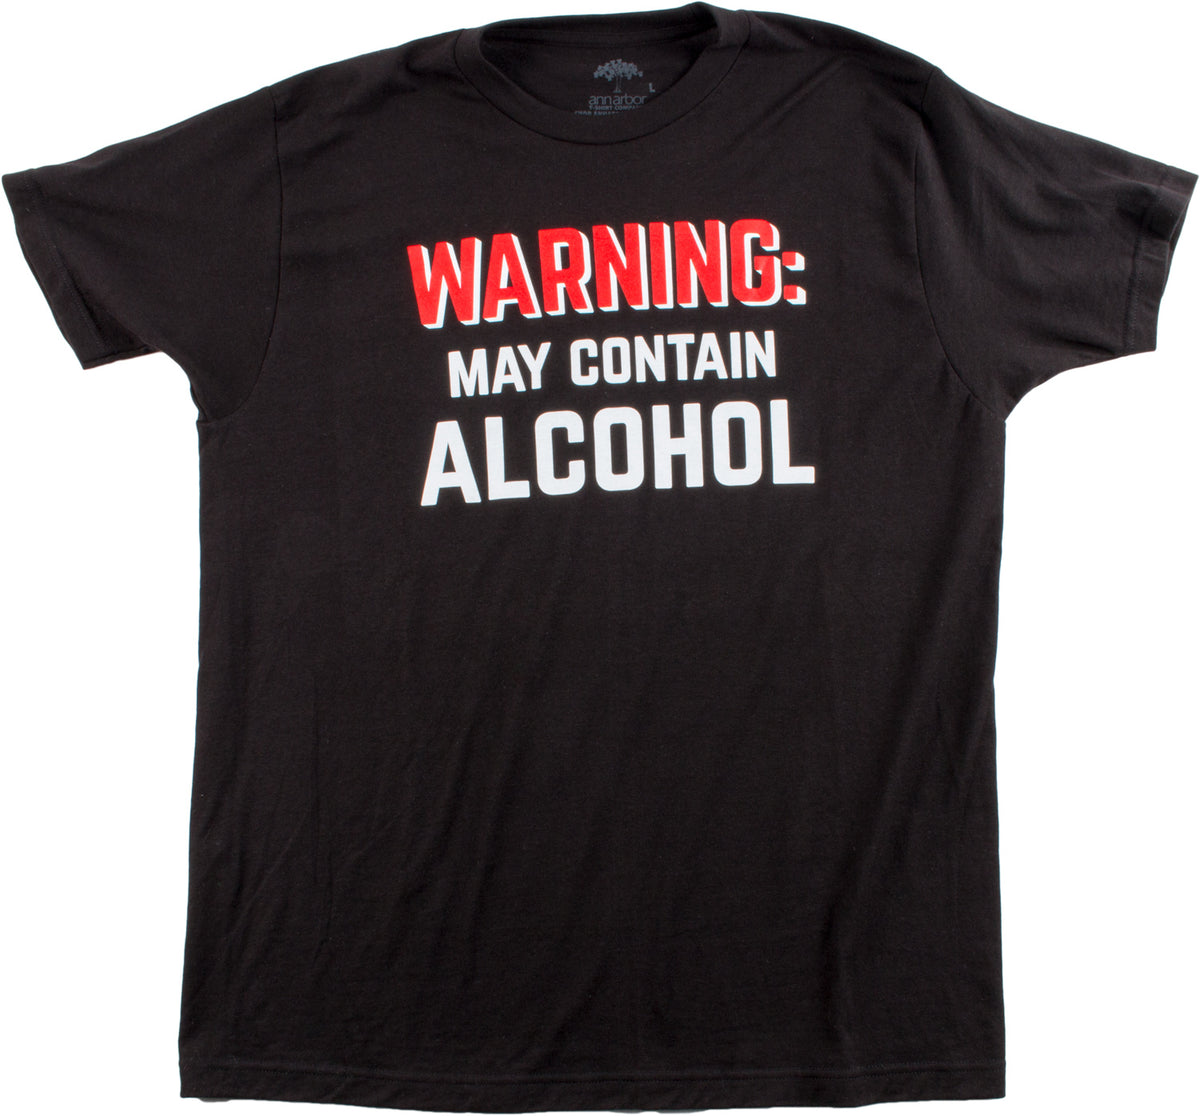 WARNING: May Contain Alcohol | Funny Beer Concert Party Bar Humor Unisex T-shirt